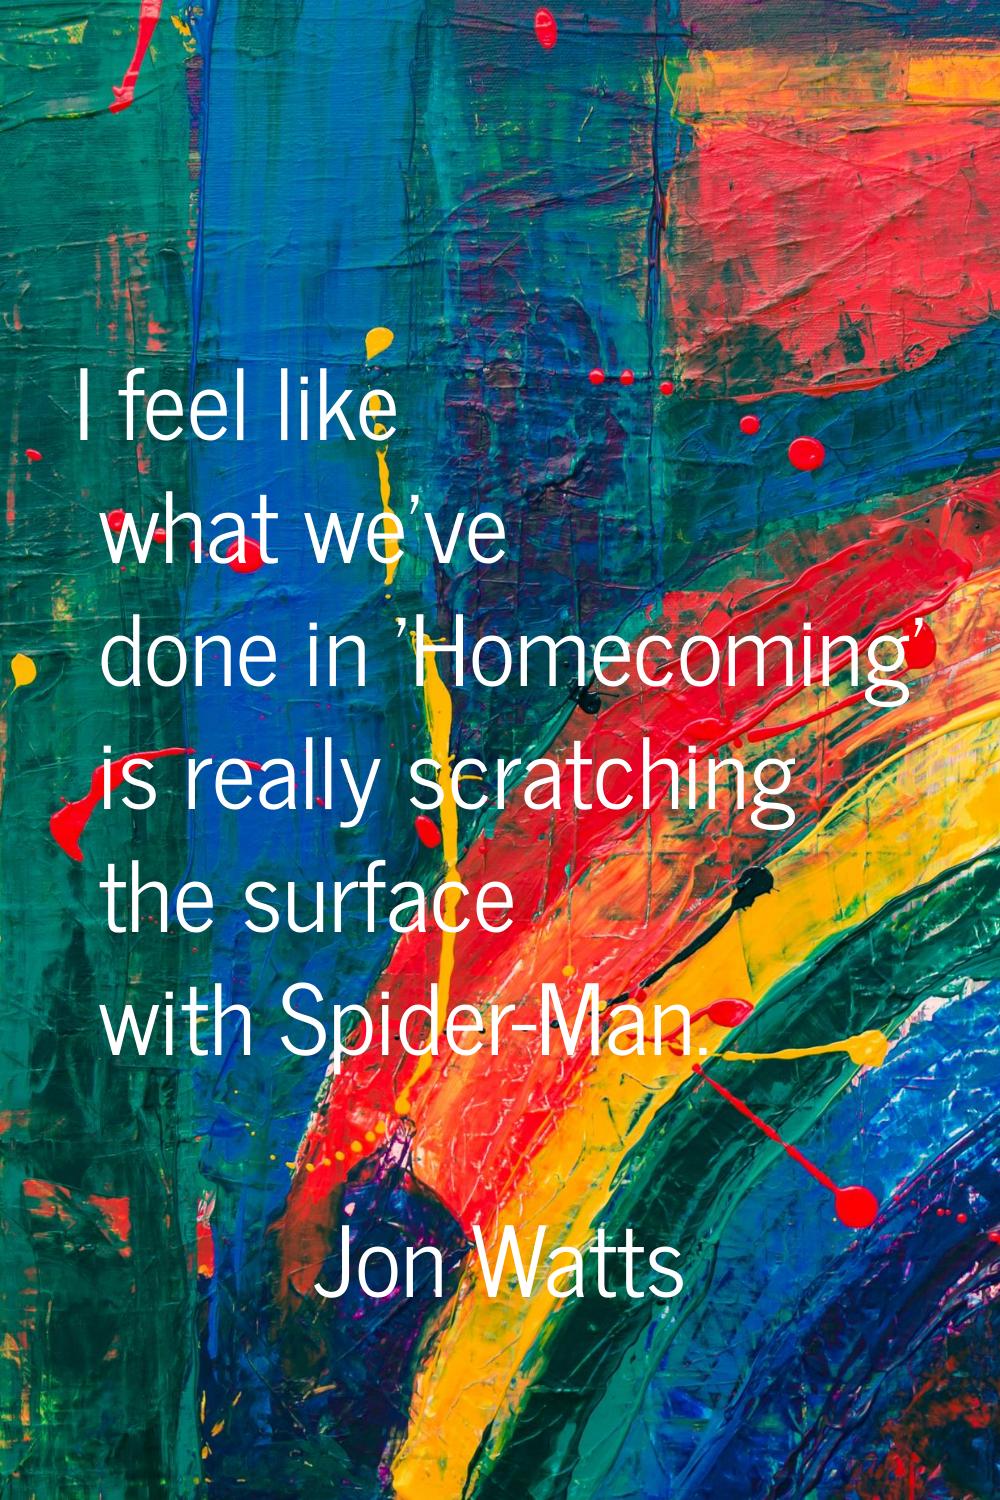 I feel like what we've done in 'Homecoming' is really scratching the surface with Spider-Man.